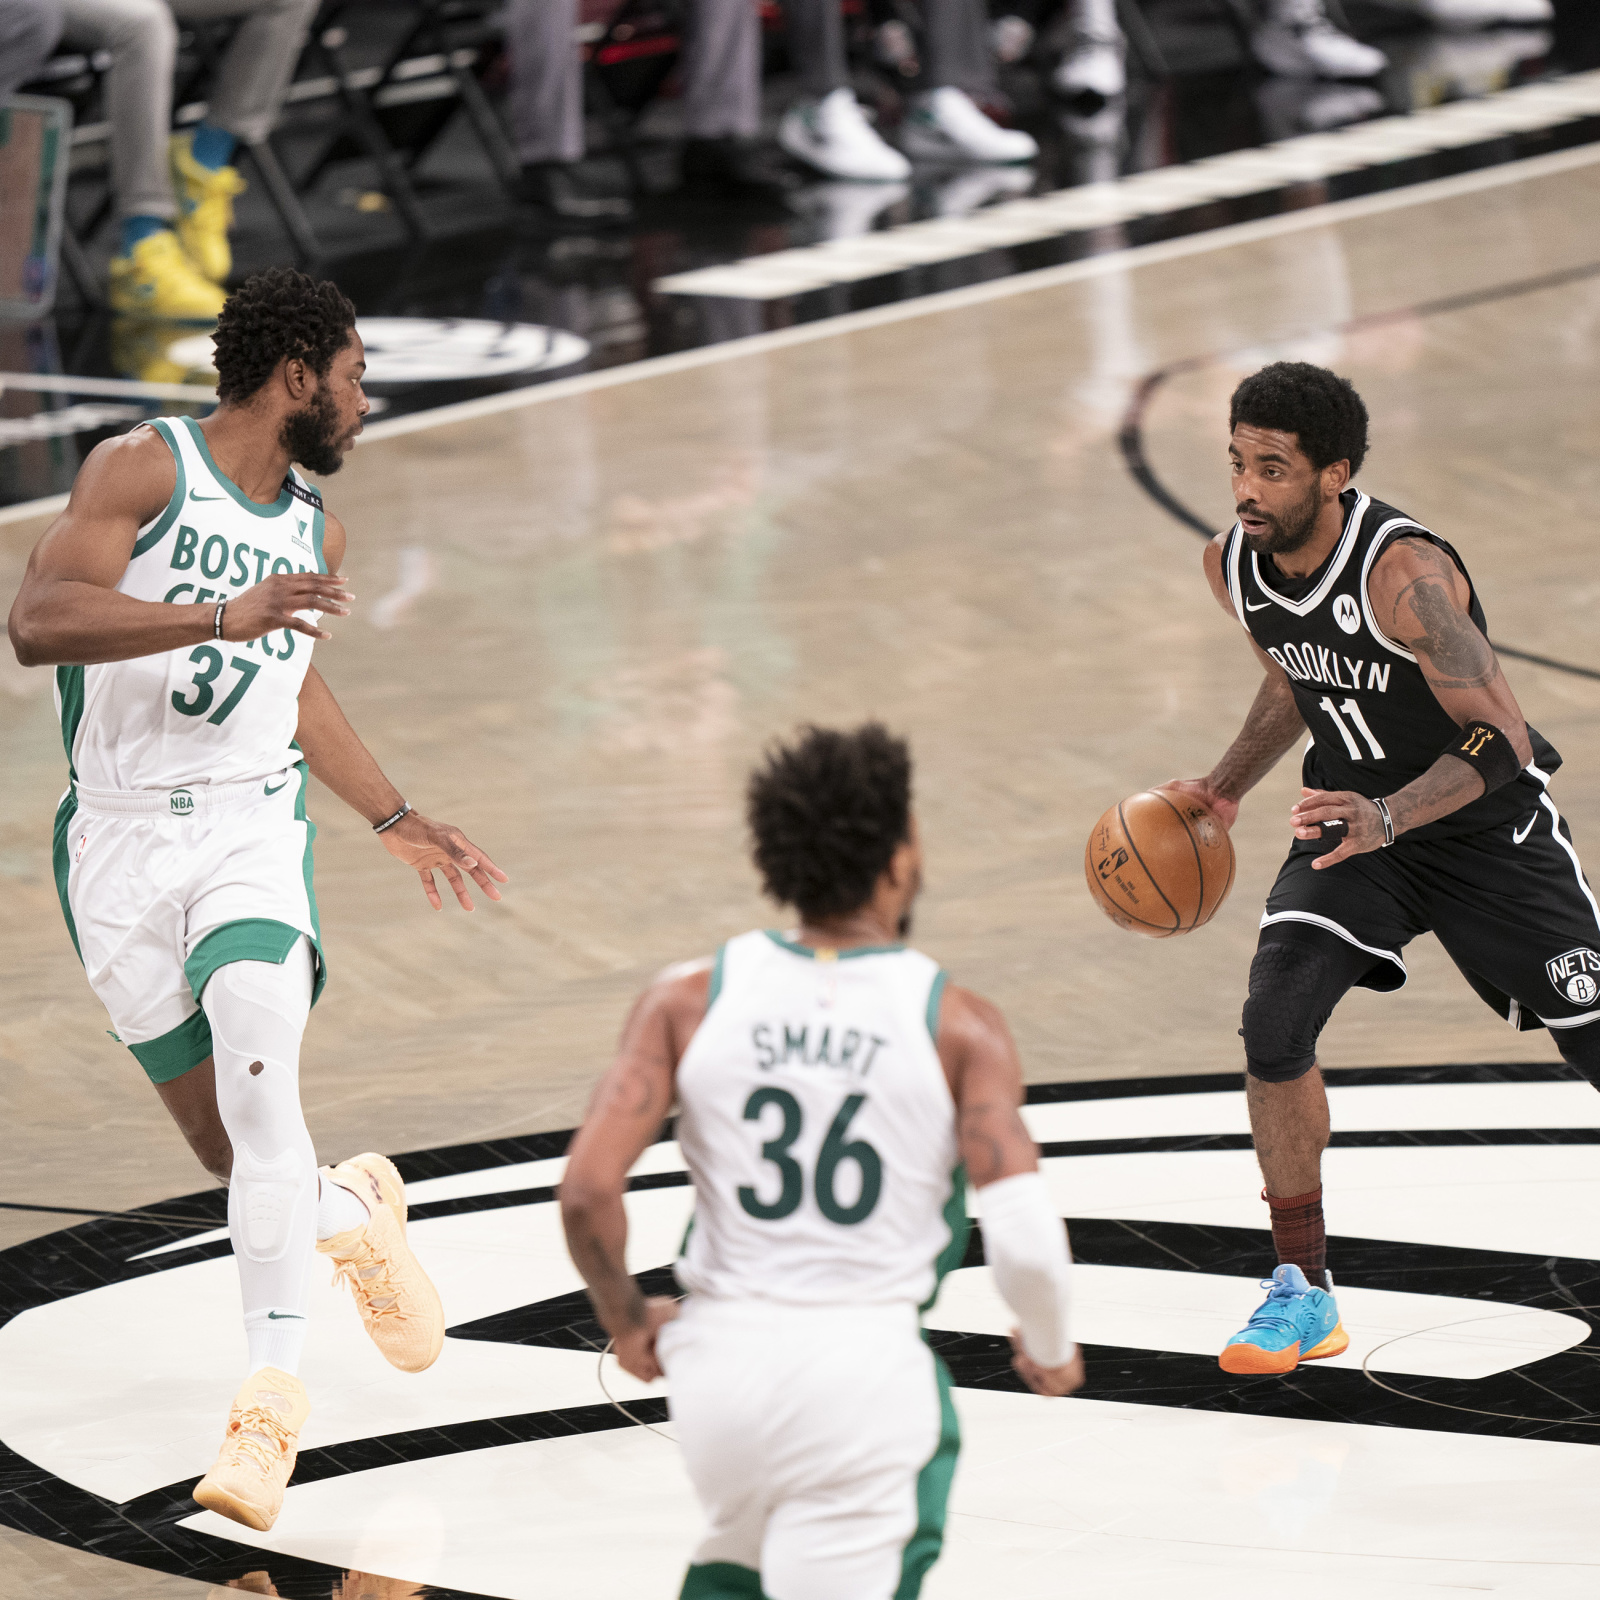 Basketball Forever - The Brooklyn Nets CRUSH the Boston Celtics 141-126!  Kevin Durant: 42 PTS, 5 AST & 2 BLK on 70% FG. Kyrie Irving: 39 PTS, 11 REB  & 2 STL.